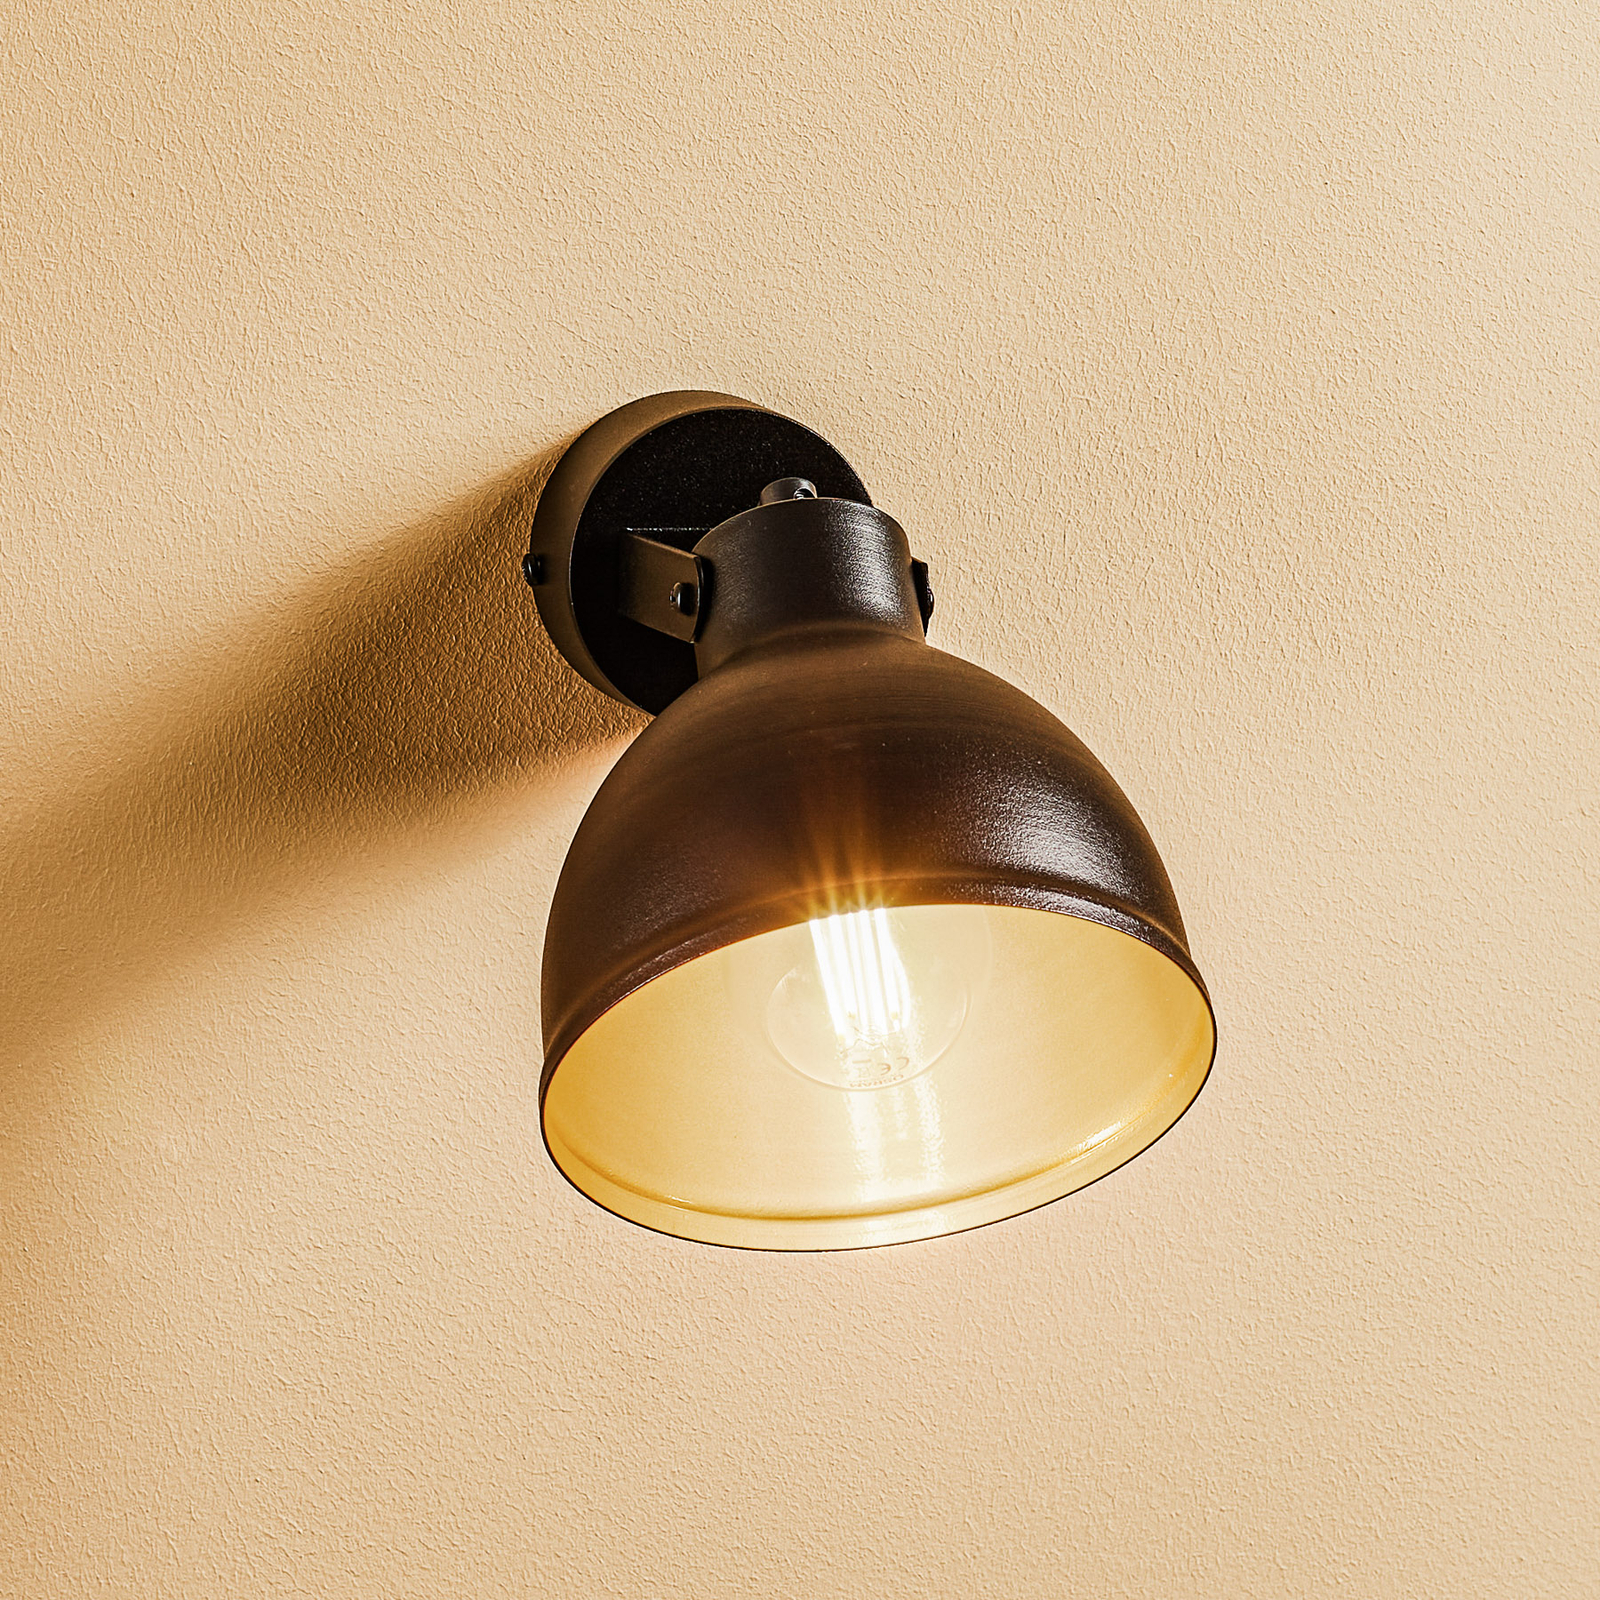 Trial wall light, swivelling lampshade, black/gold